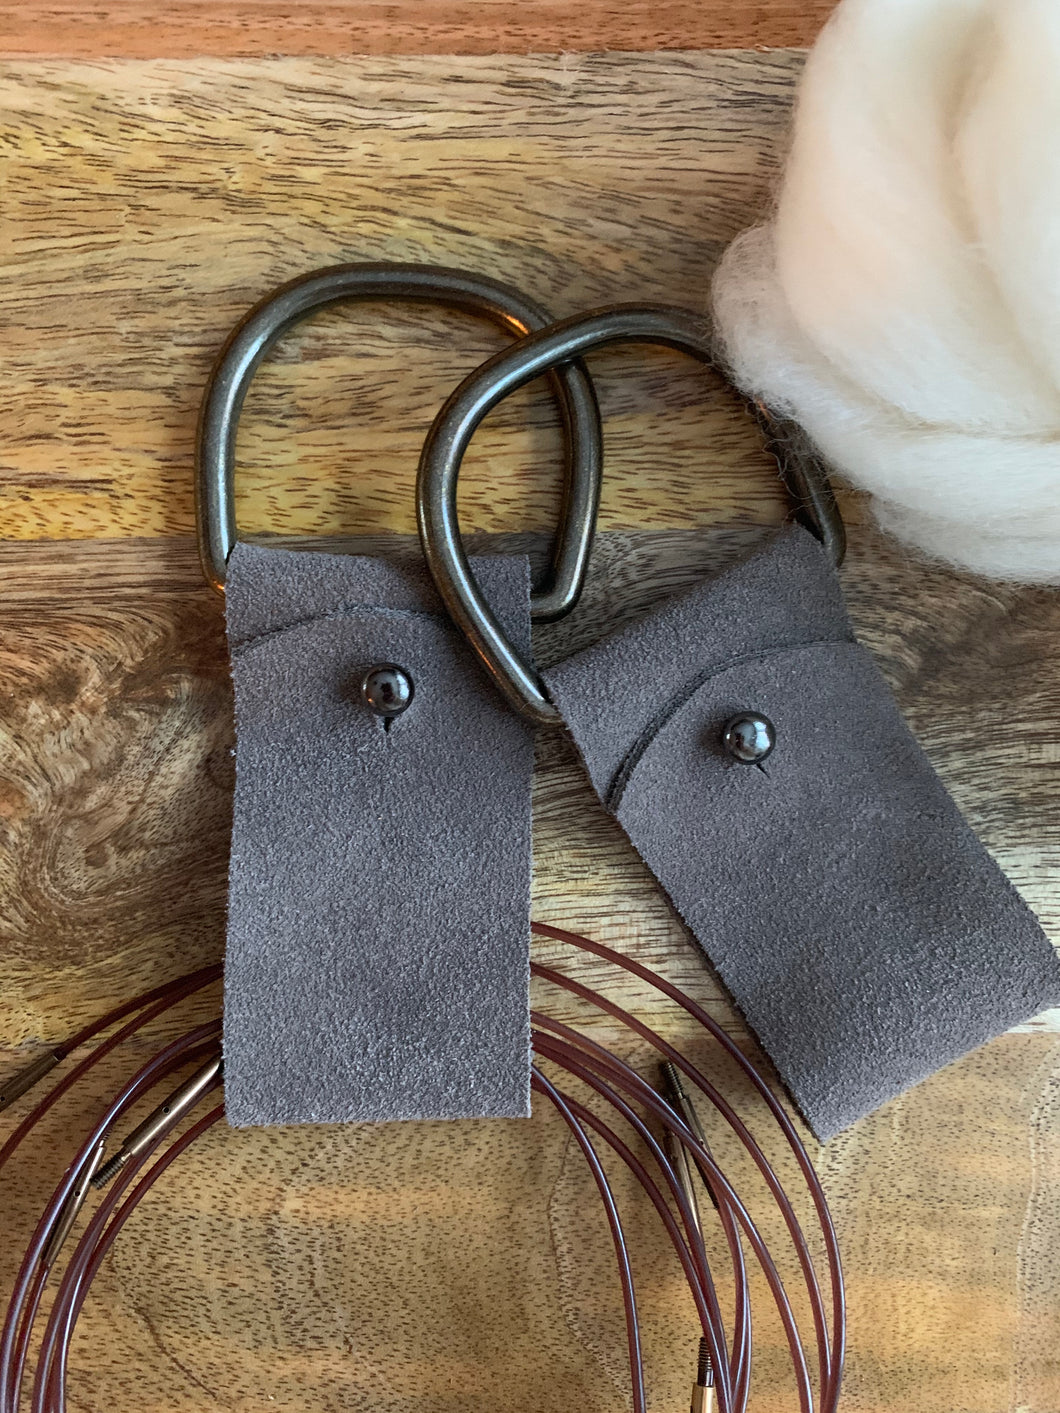 Circular knitting needle holders in gray suede - made of a brass D ring, leather loop, and clasp for opening the leather. 